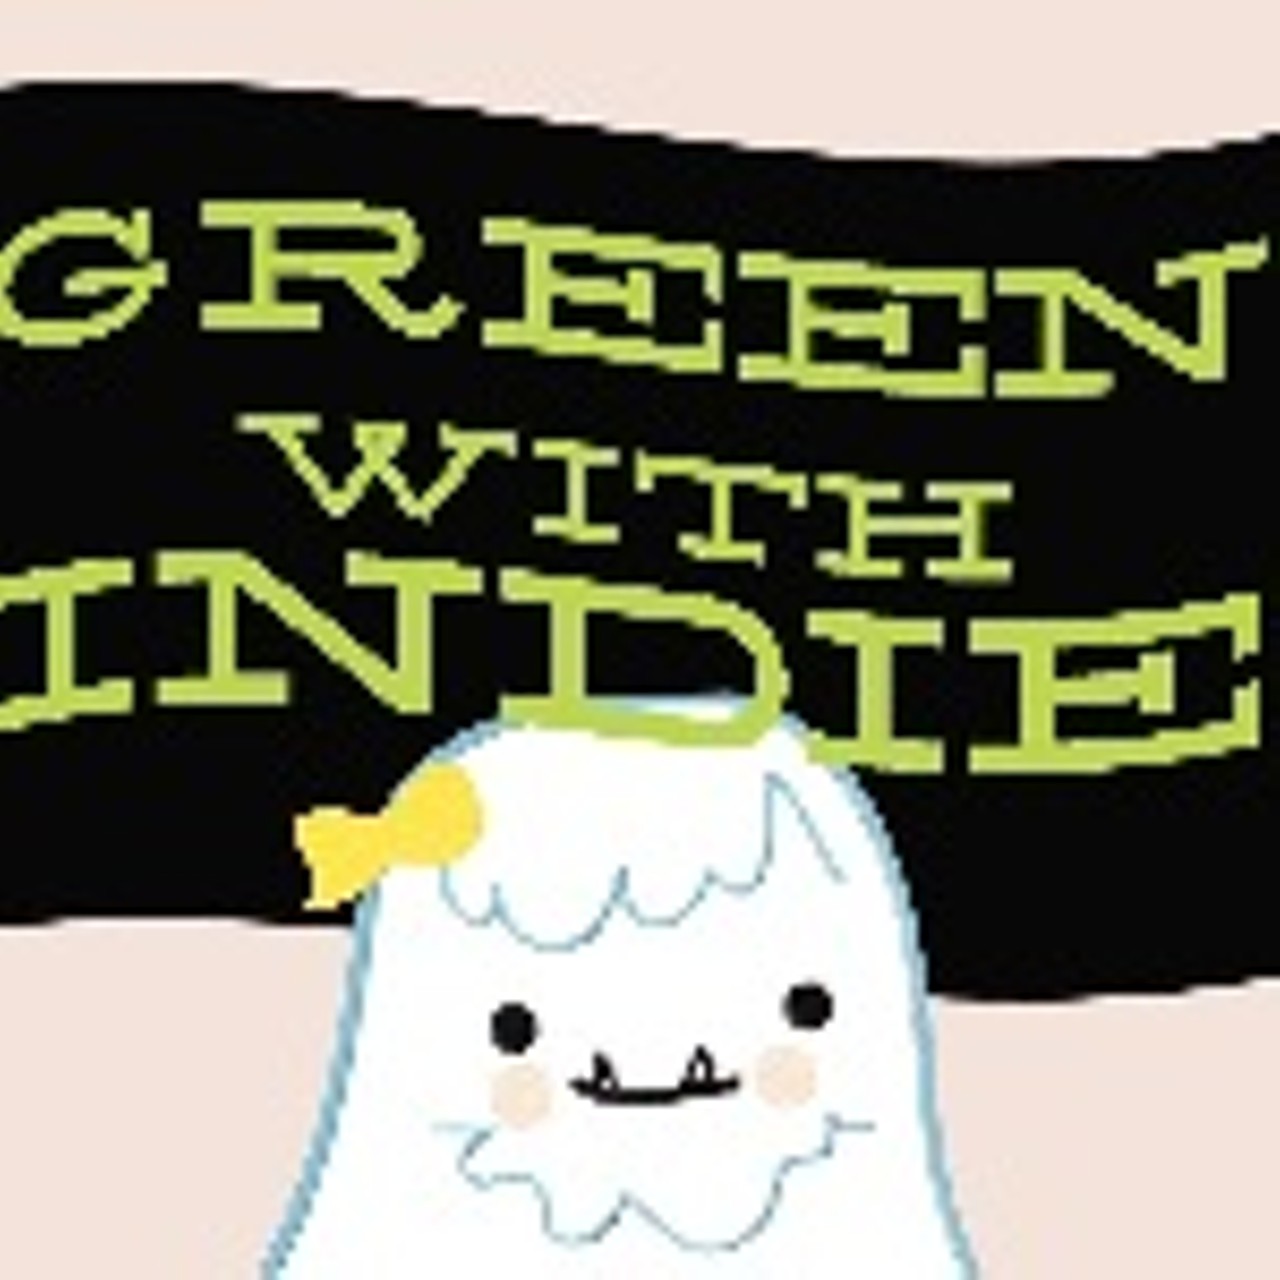 Green with Indie